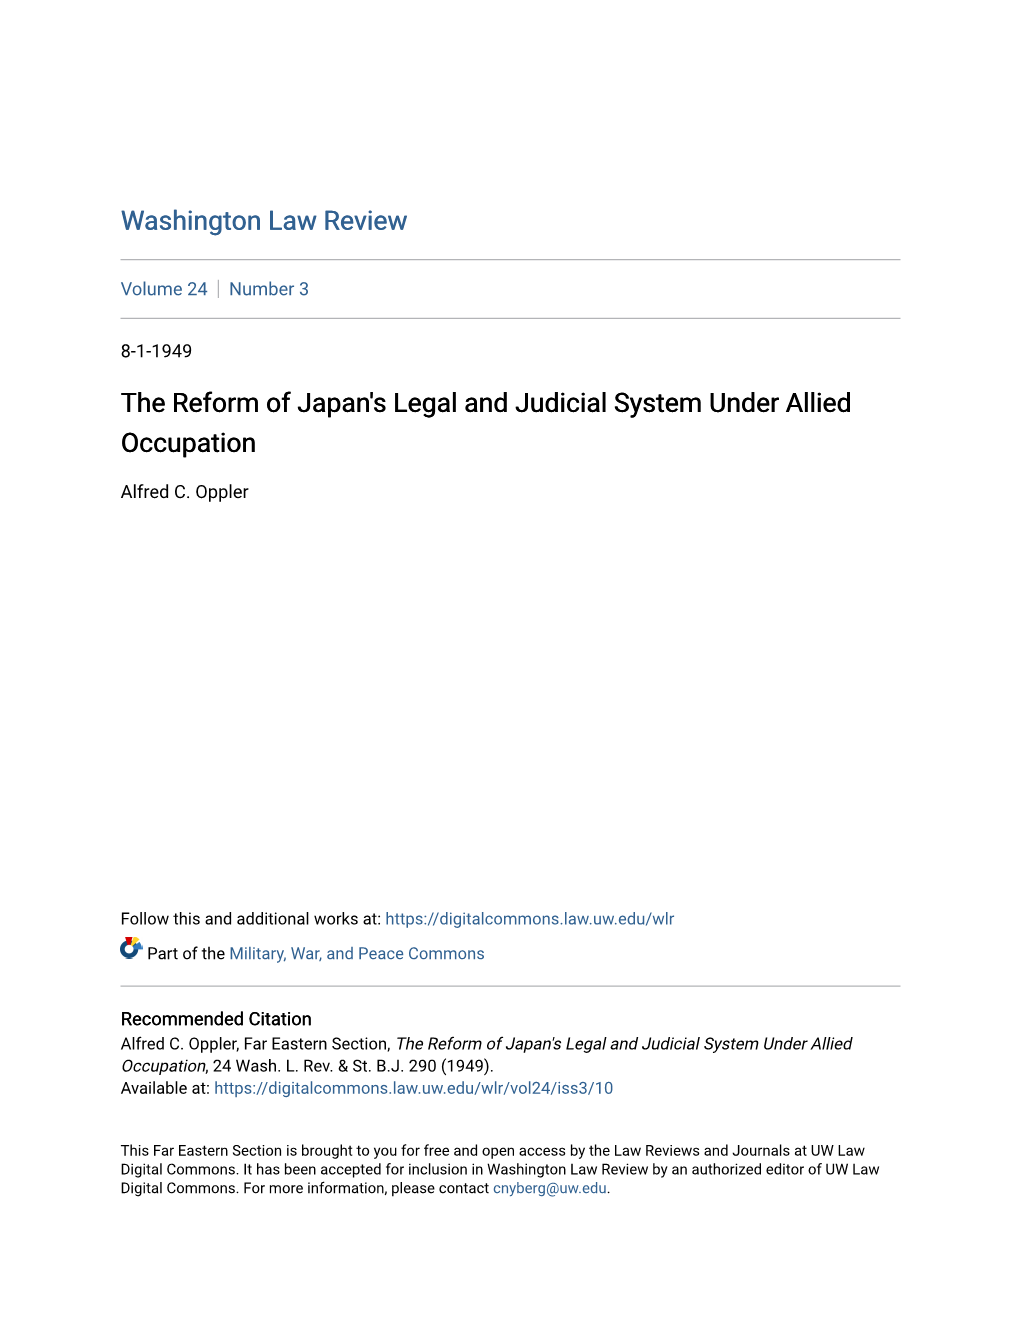 The Reform of Japan's Legal and Judicial System Under Allied Occupation